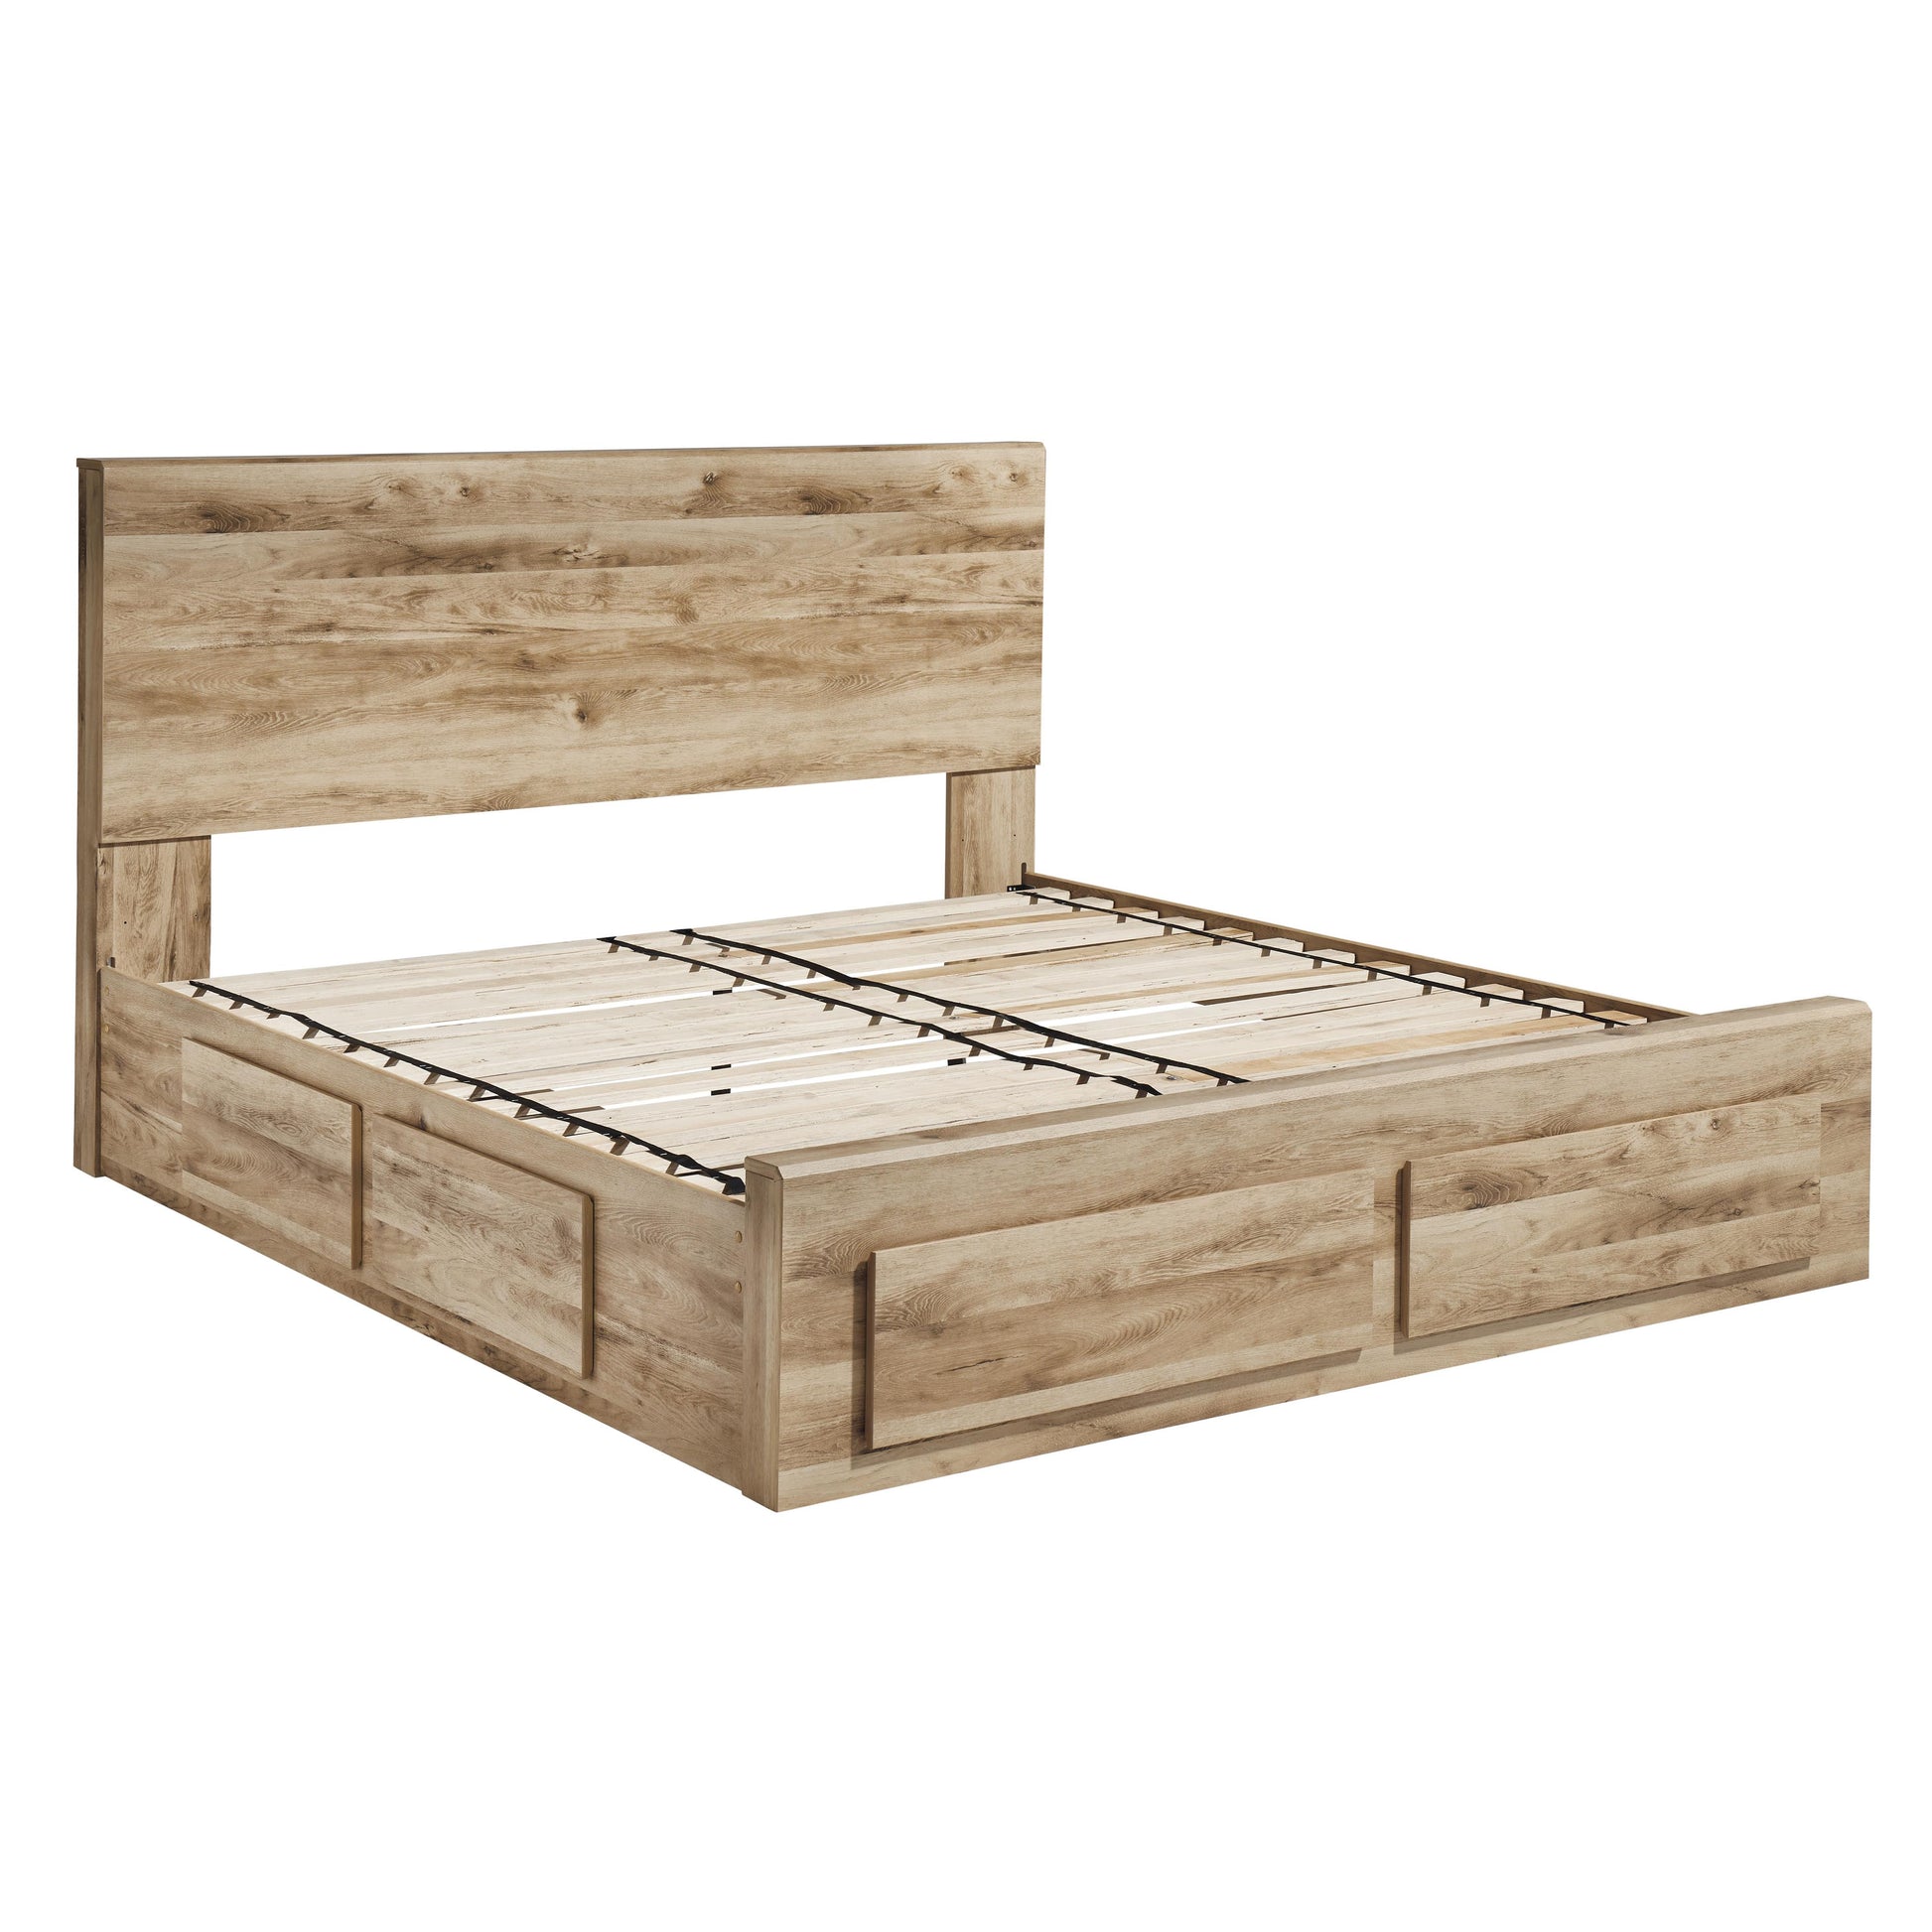 Signature Design by Ashley Hyanna Queen Panel Bed with Storage B1050-57/B1050-54S/B1050-60/B1050-60/B100-13 IMAGE 4